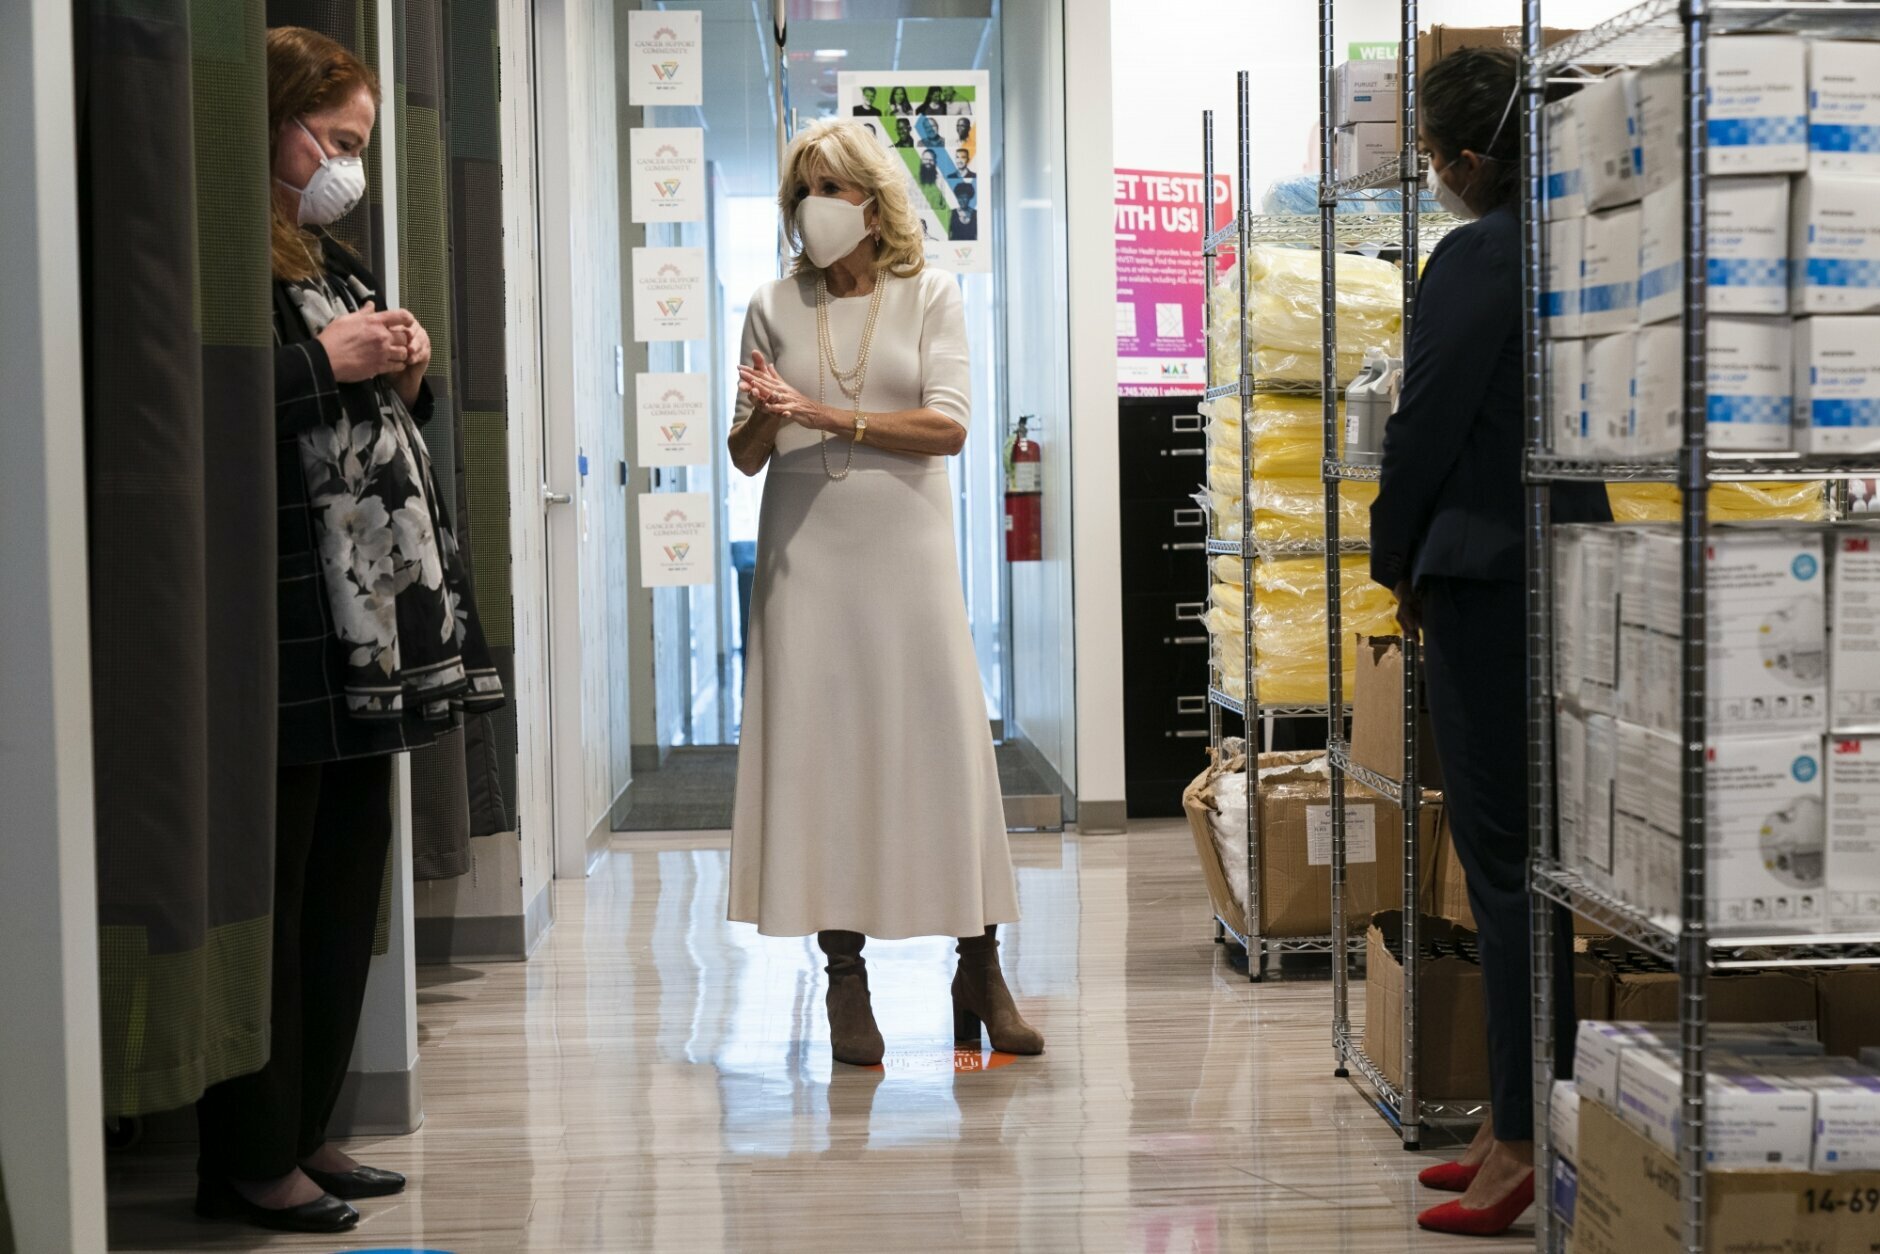 First lady Jill Biden, center, speaks with Kim Thiboldeaux, left, CEO of the Cancer Support Community, and Naseema Shafi, right, CEO of Whitman-Walker Health, during a tour of Whitman-Walker Health Friday, Jan. 22, 2021, in Washington. (AP Photo/Jacquelyn Martin, Pool)